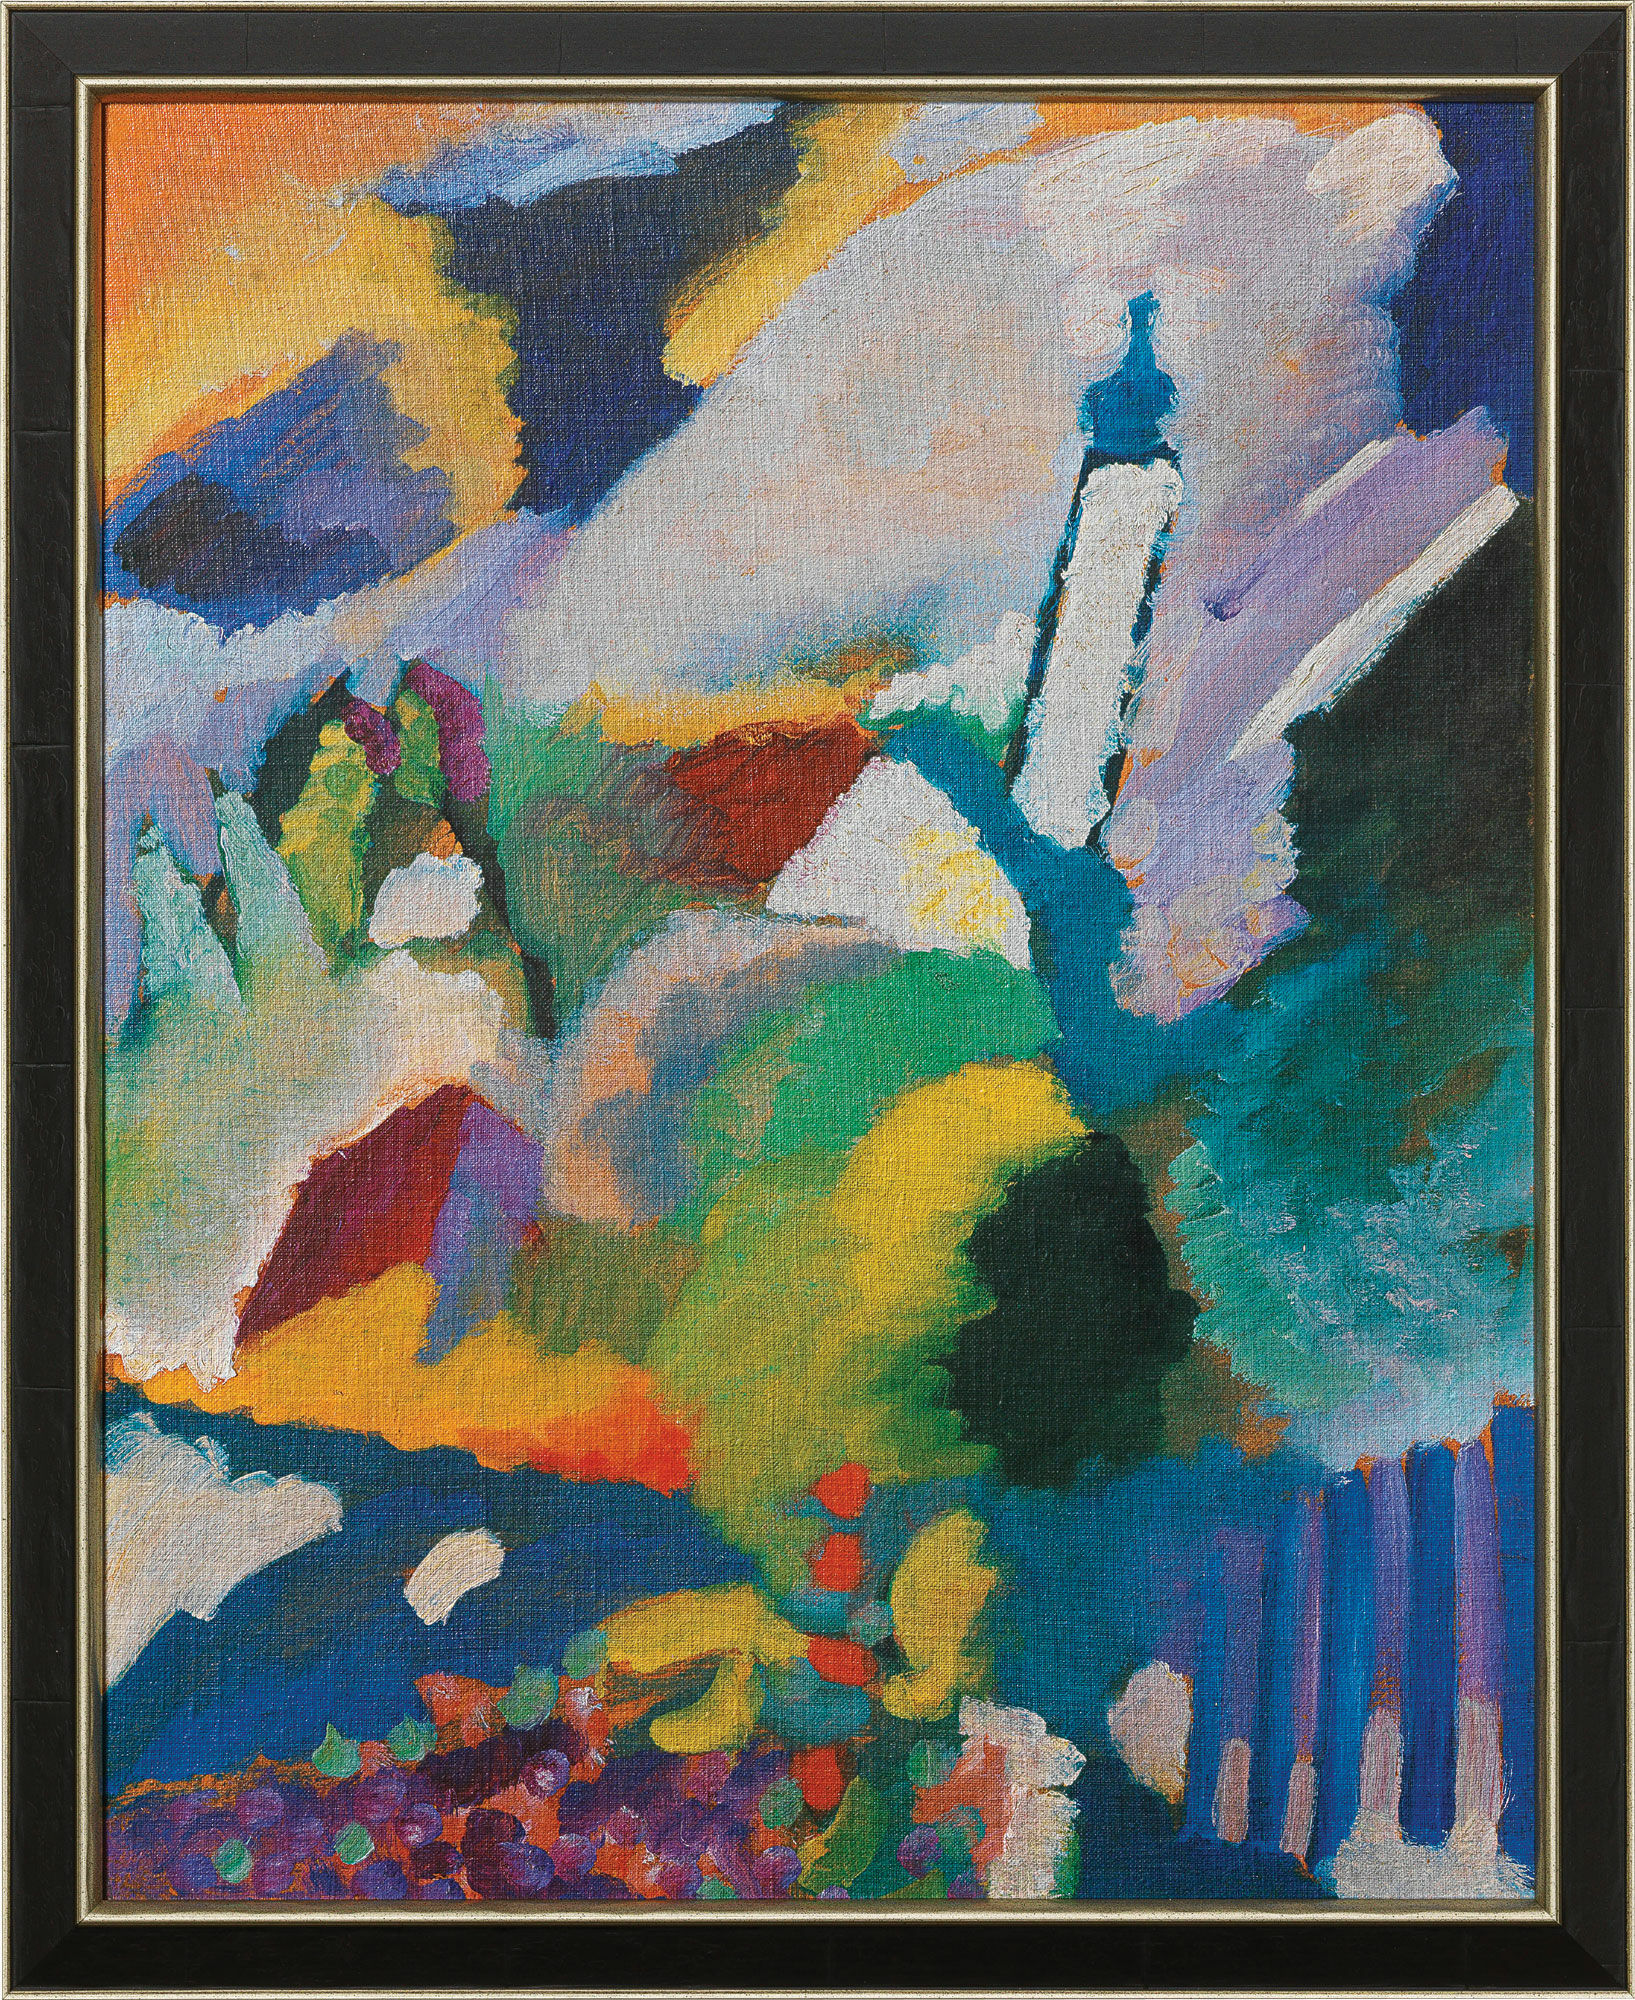 Picture "Church in Murnau" (1910), framed by Wassily Kandinsky